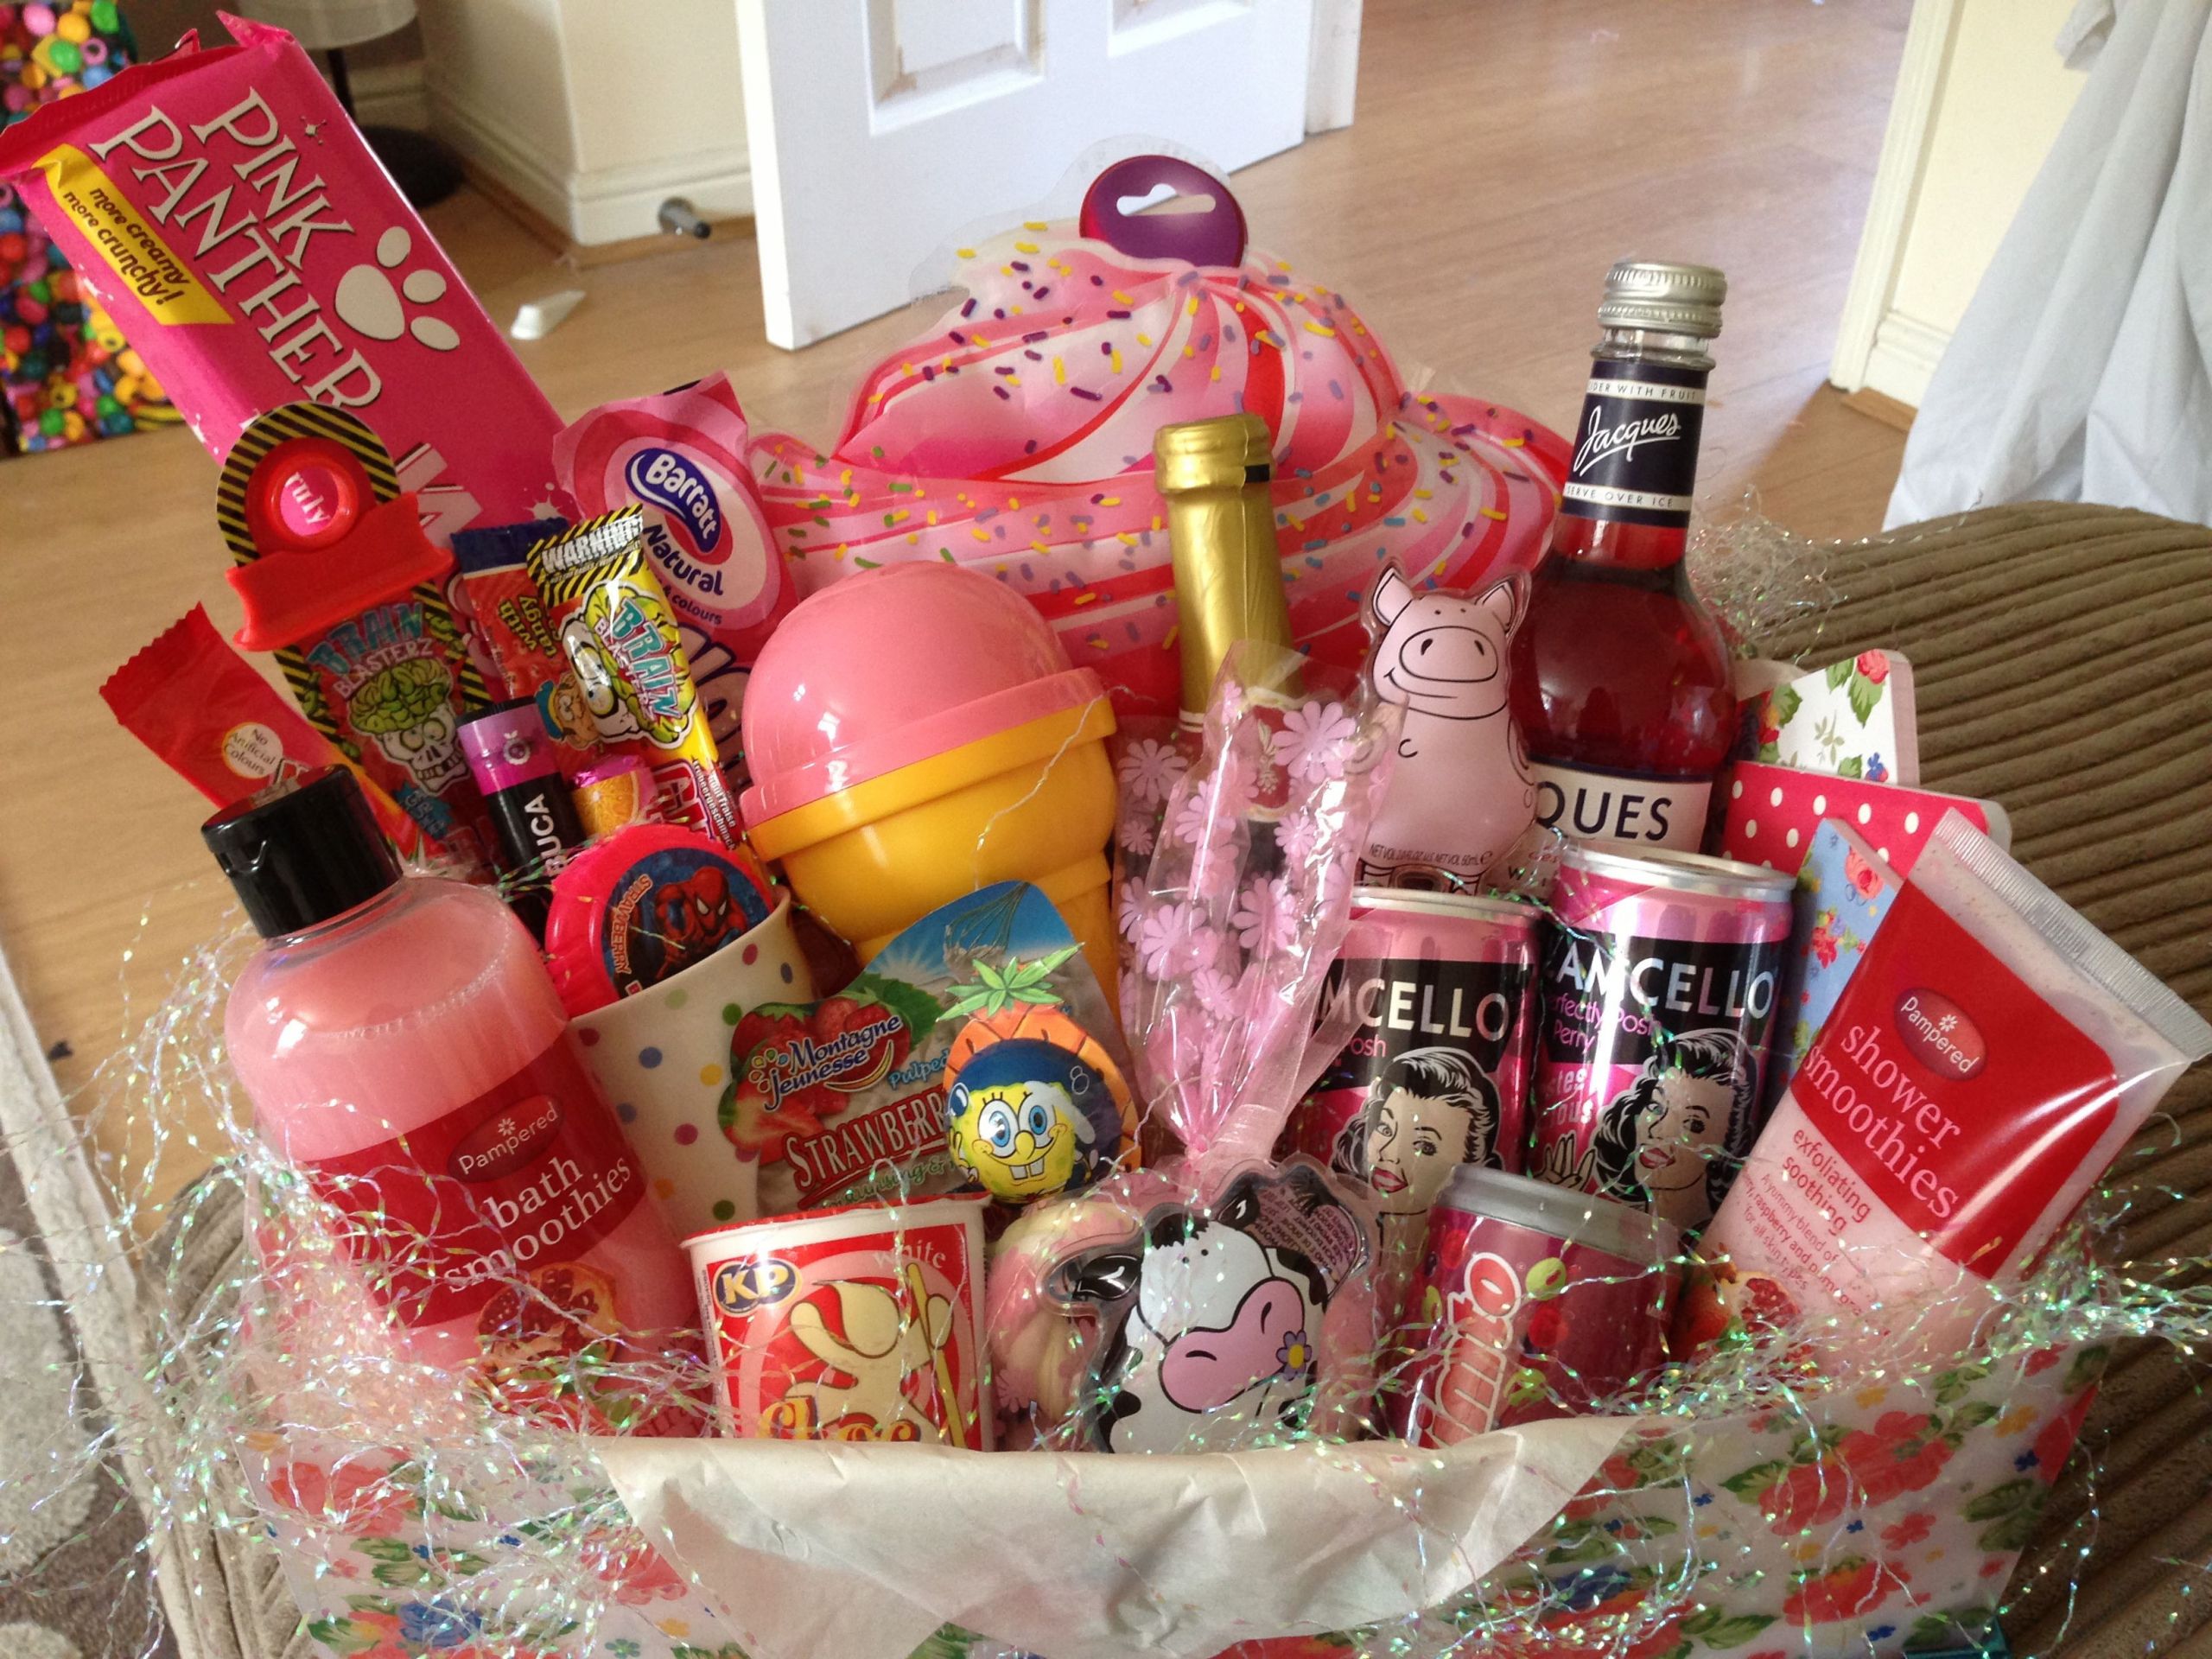 Girls Night Out Gift Ideas
 Girly hamper for girls night in Given to a good friend